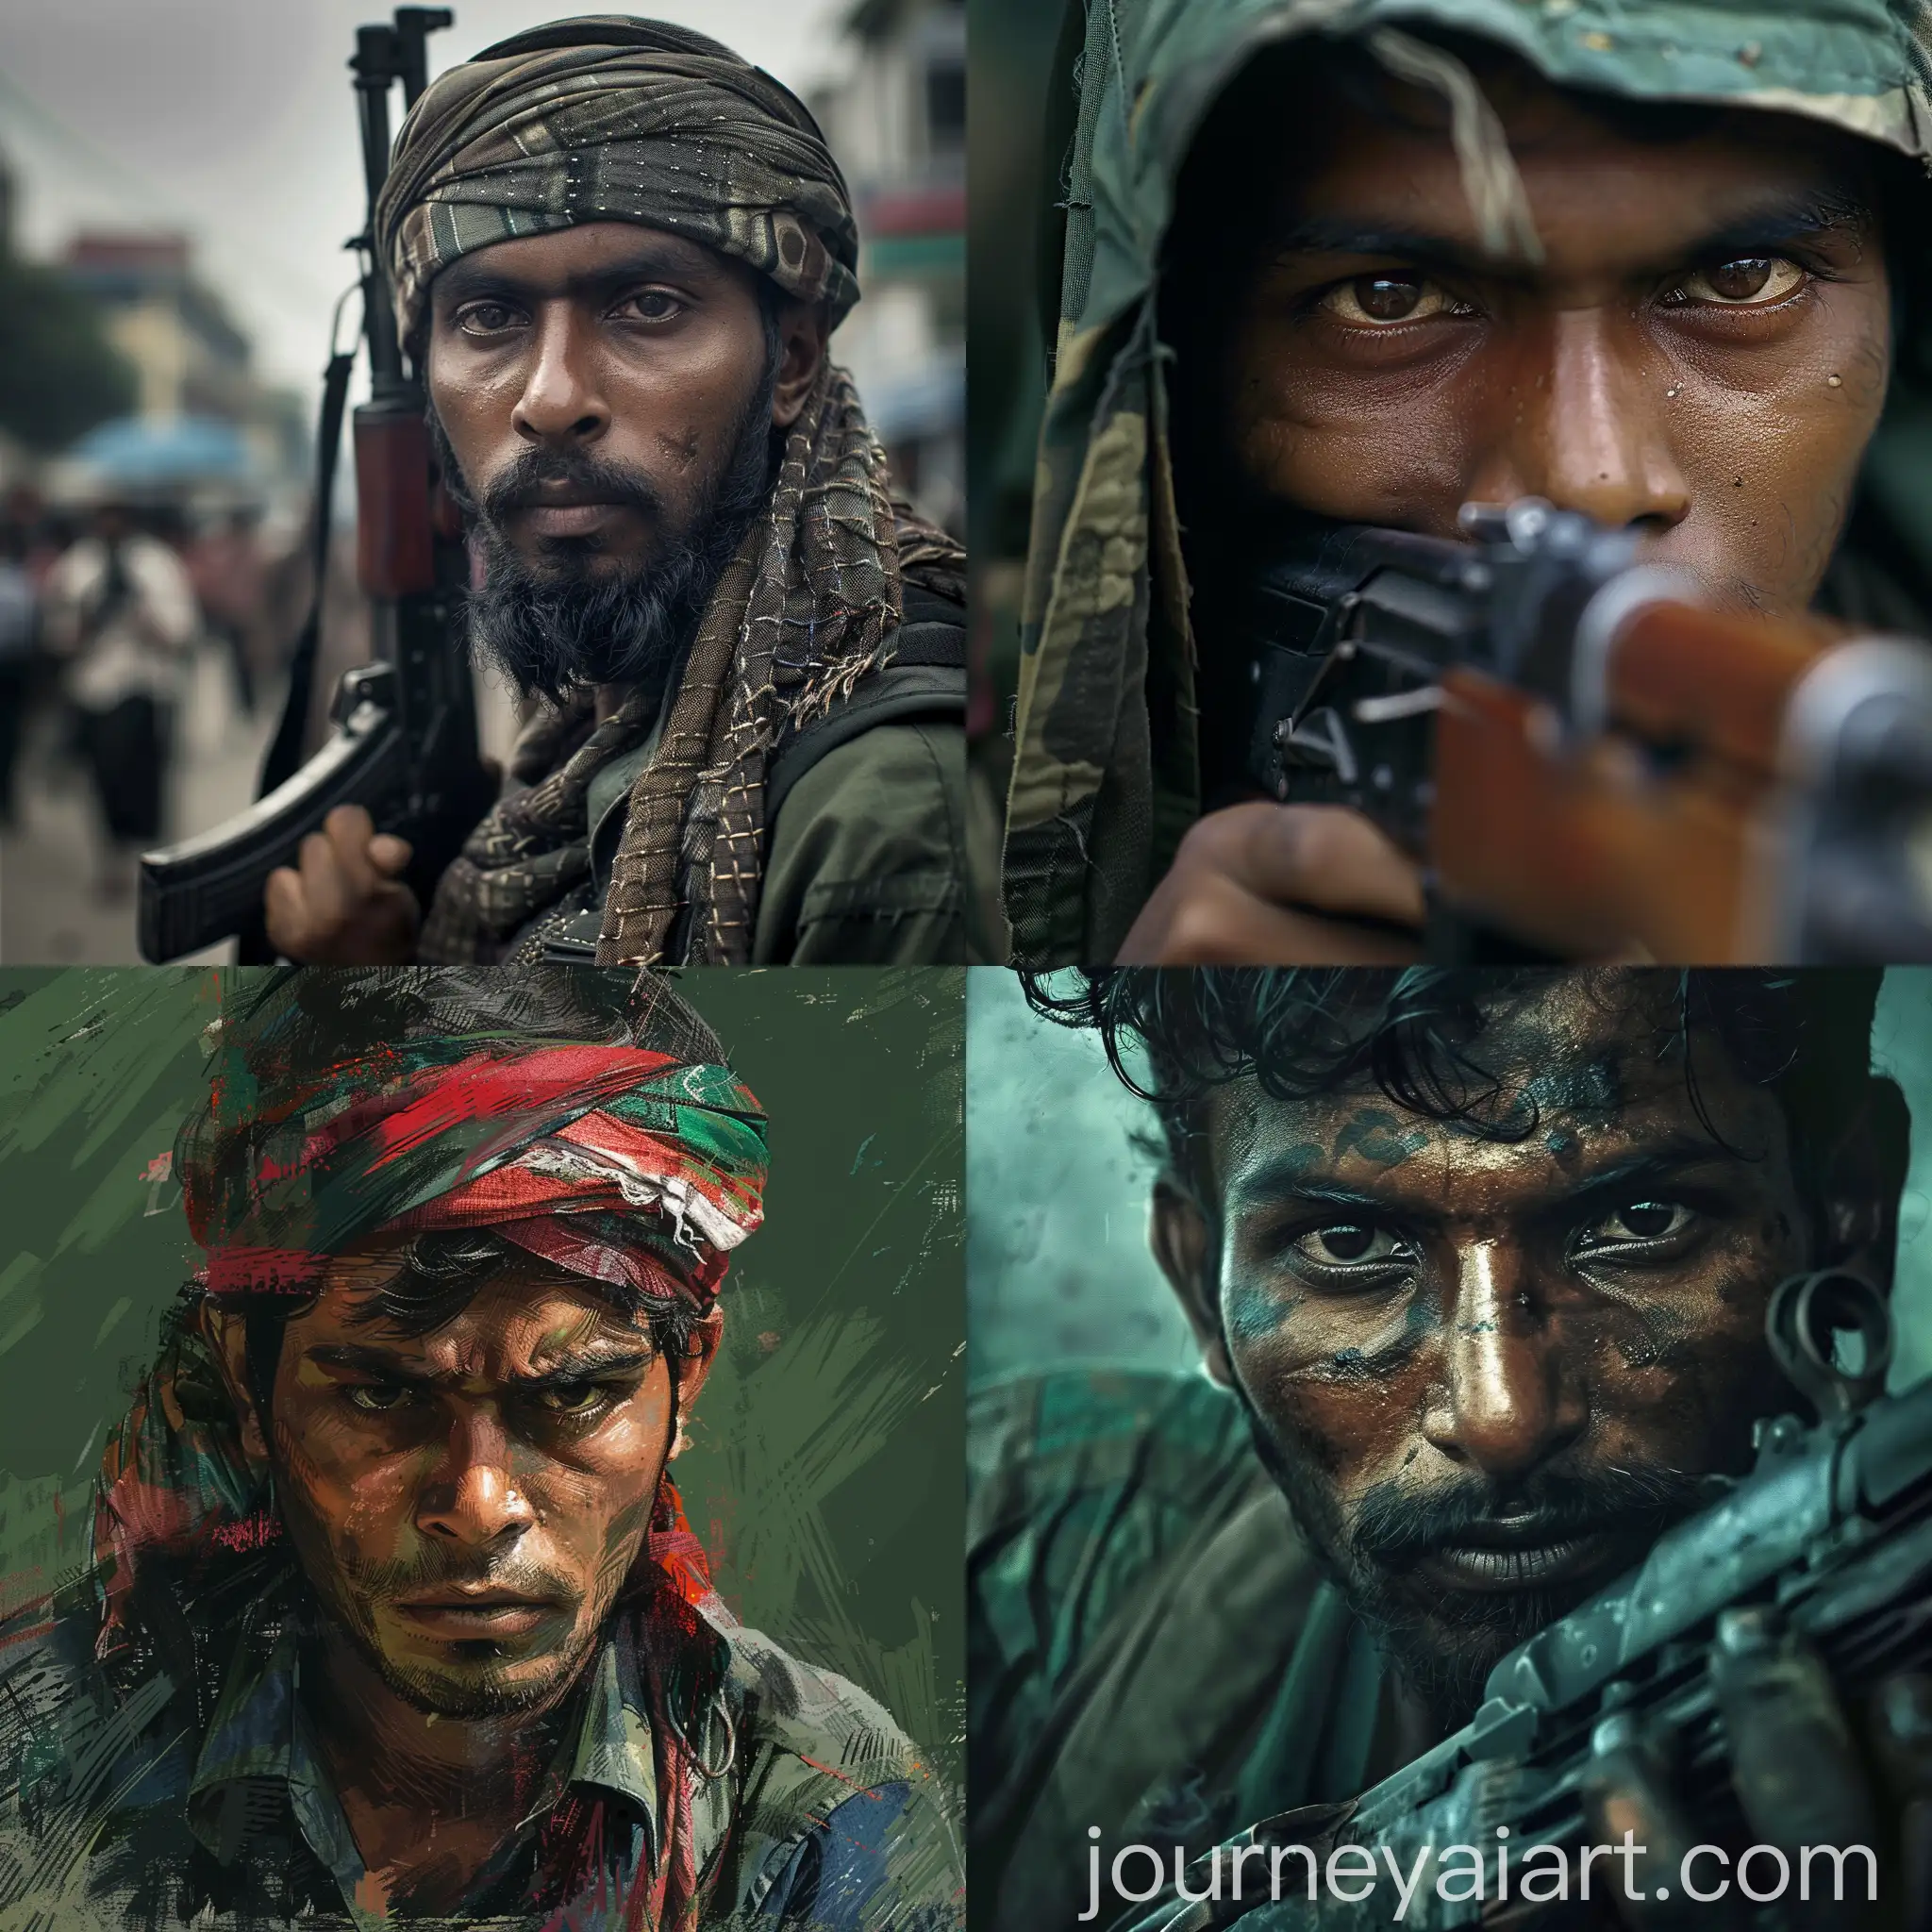 Bangladeshi-Freedom-Fighter-Tensed-in-Dramatic-Portrait